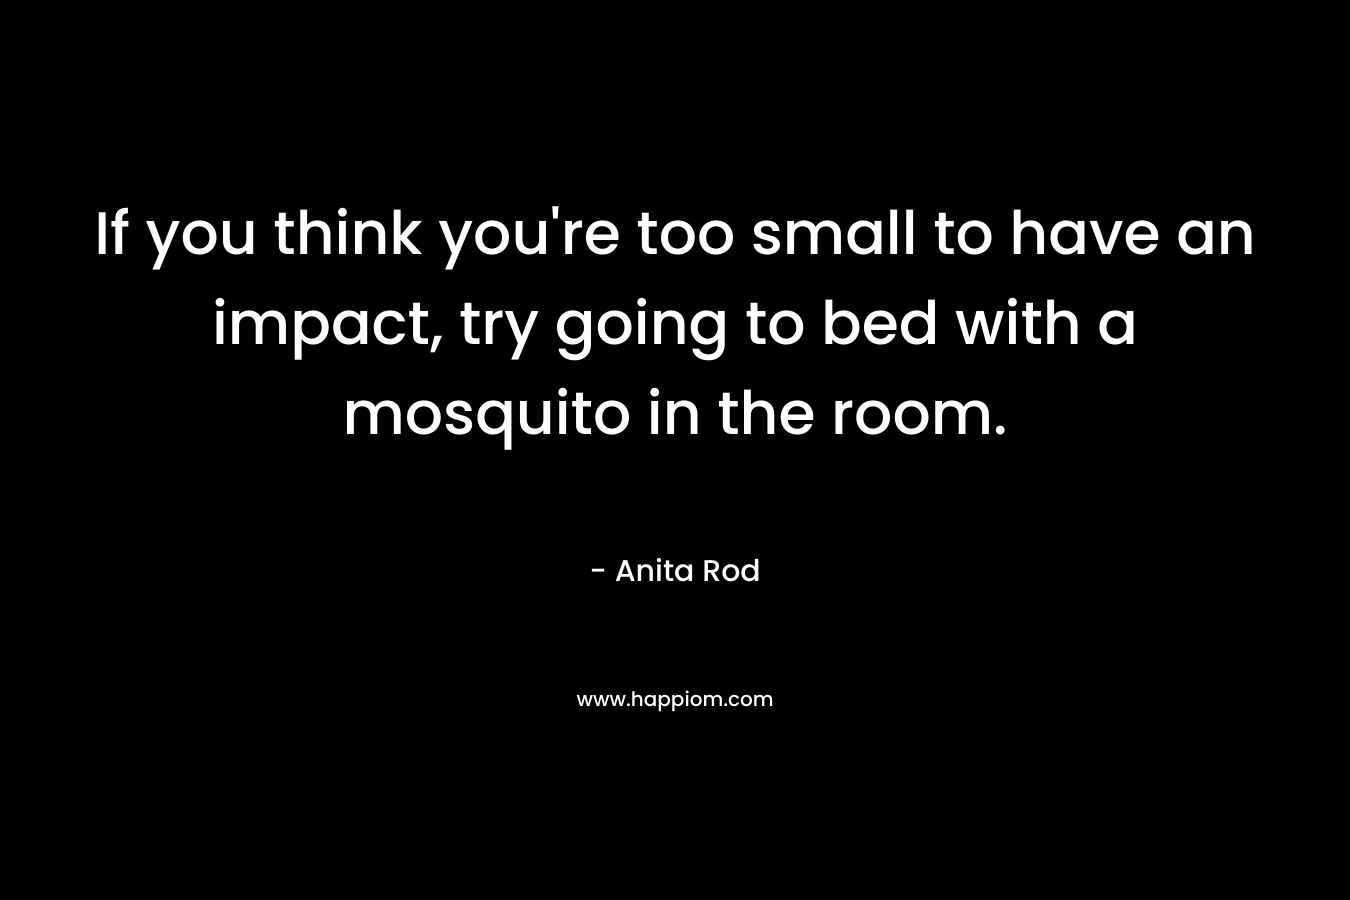 If you think you’re too small to have an impact, try going to bed with a mosquito in the room. – Anita Rod